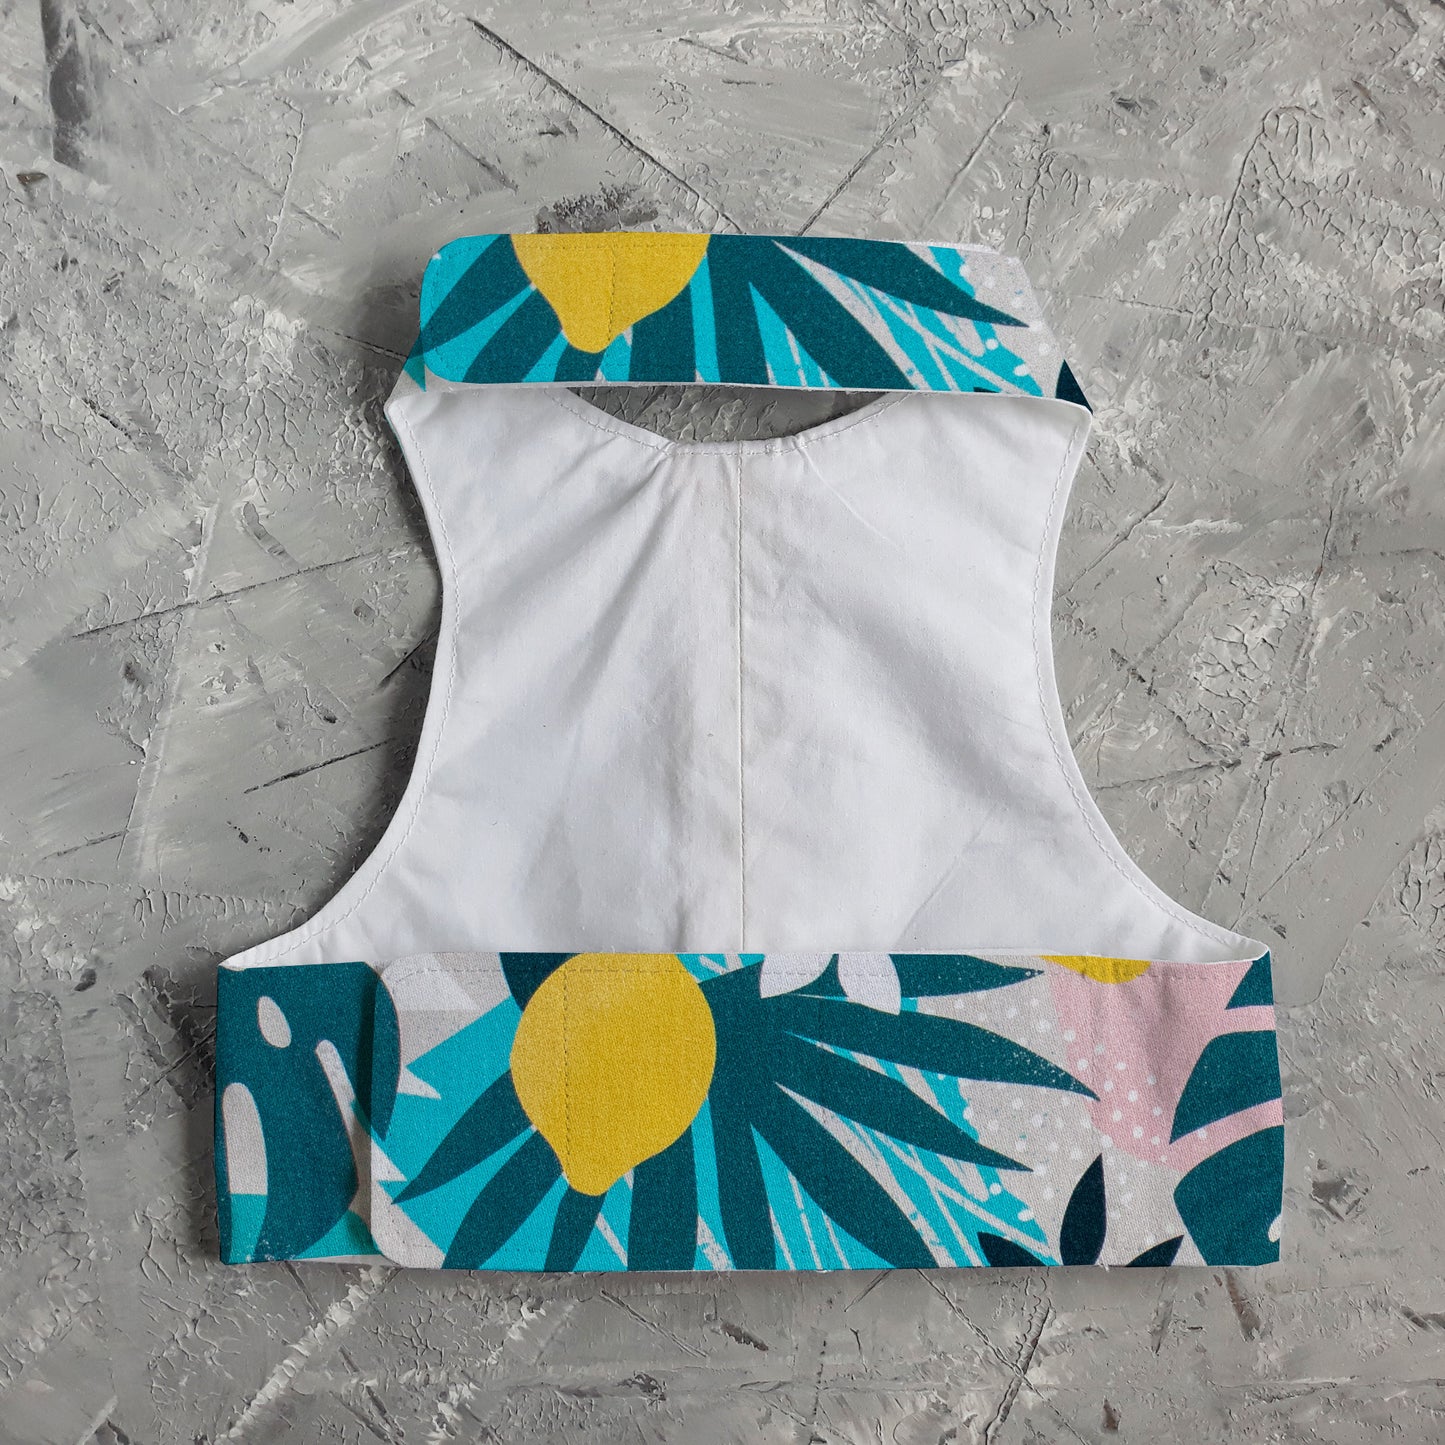 Difficult to escape and safety cat harness. Breathable cotton vest "Tropical Lemon"